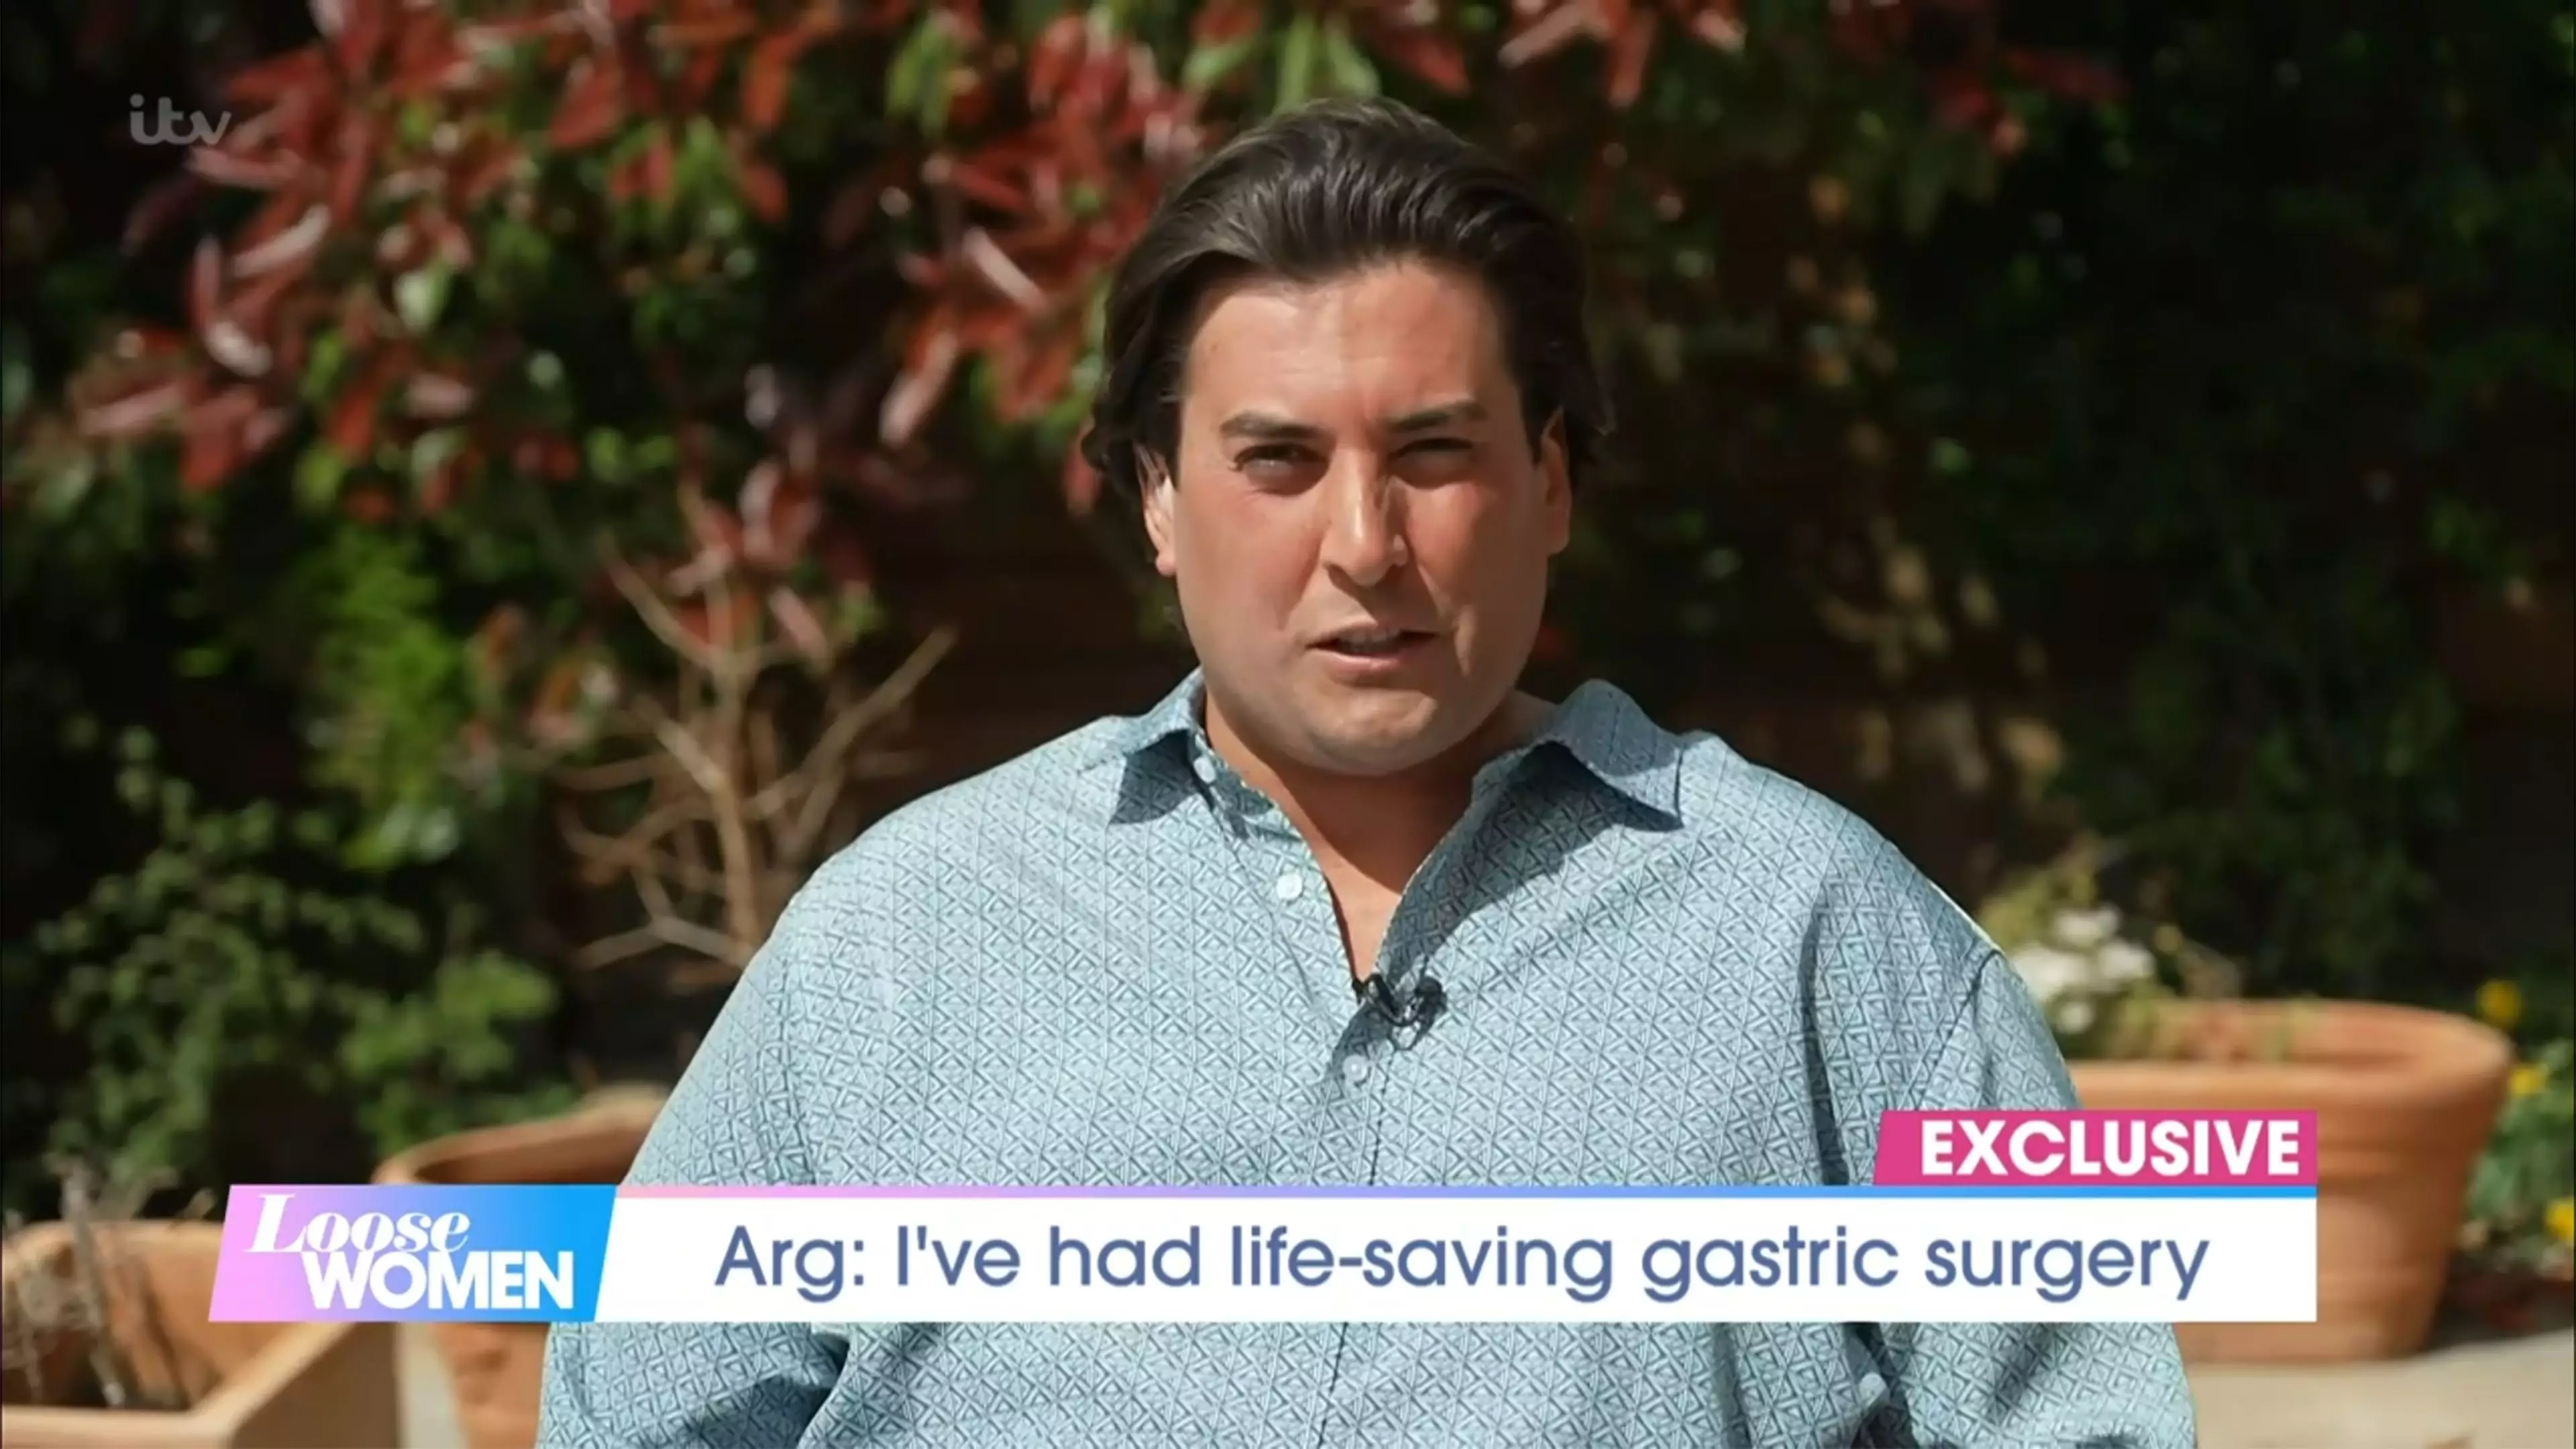 Arg has now lost 2.5 stone (